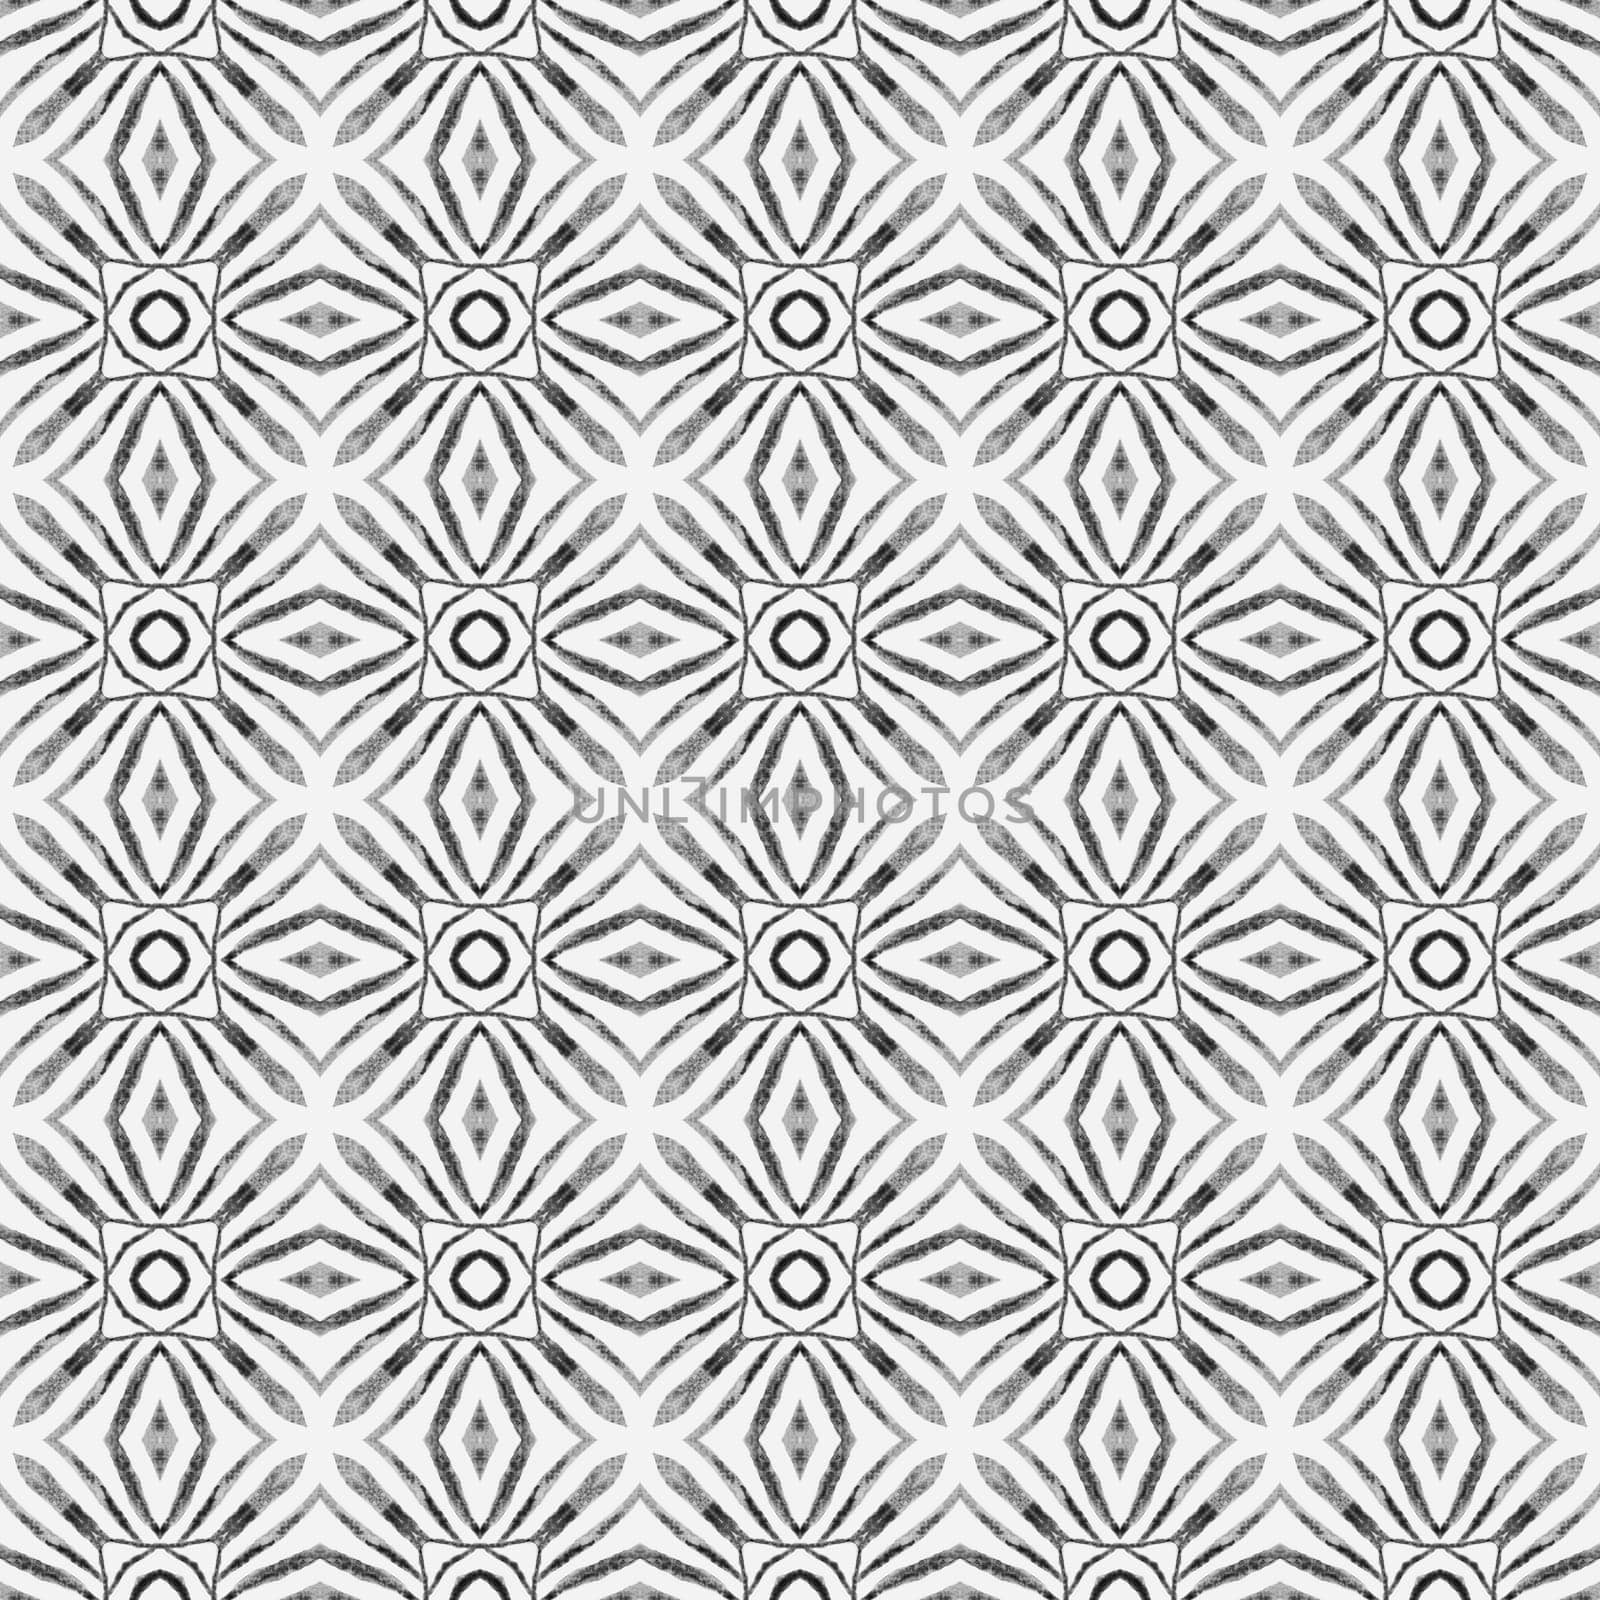 Tiled watercolor background. Black and white by beginagain